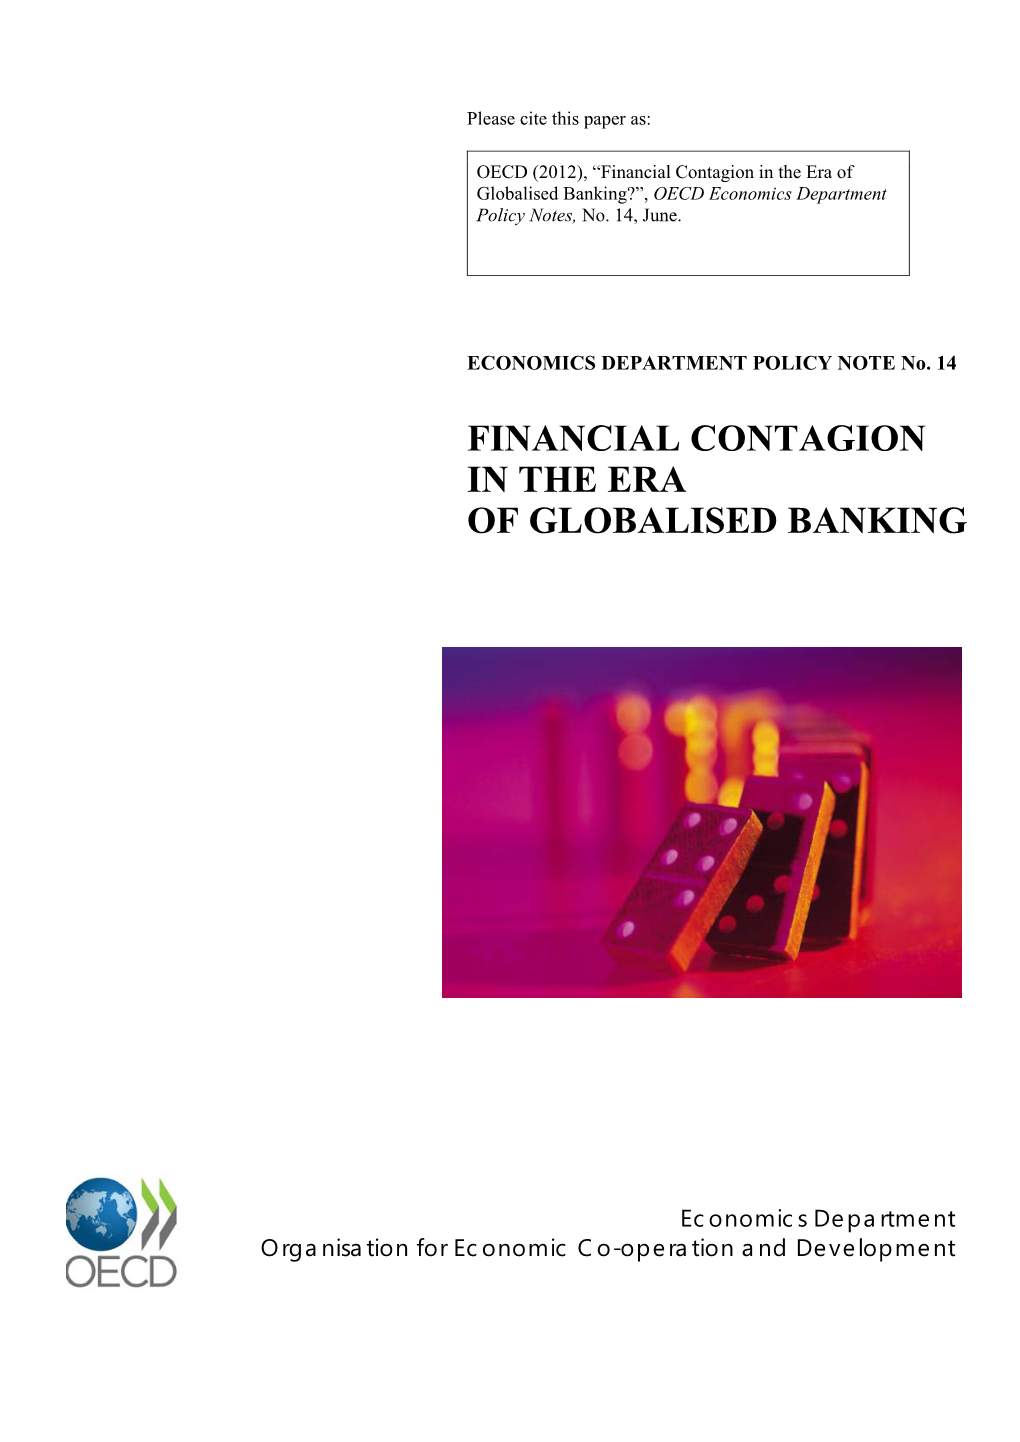 Financial Contagion in the Era of Globalised Banking?”, OECD Economics Department Policy Notes, No